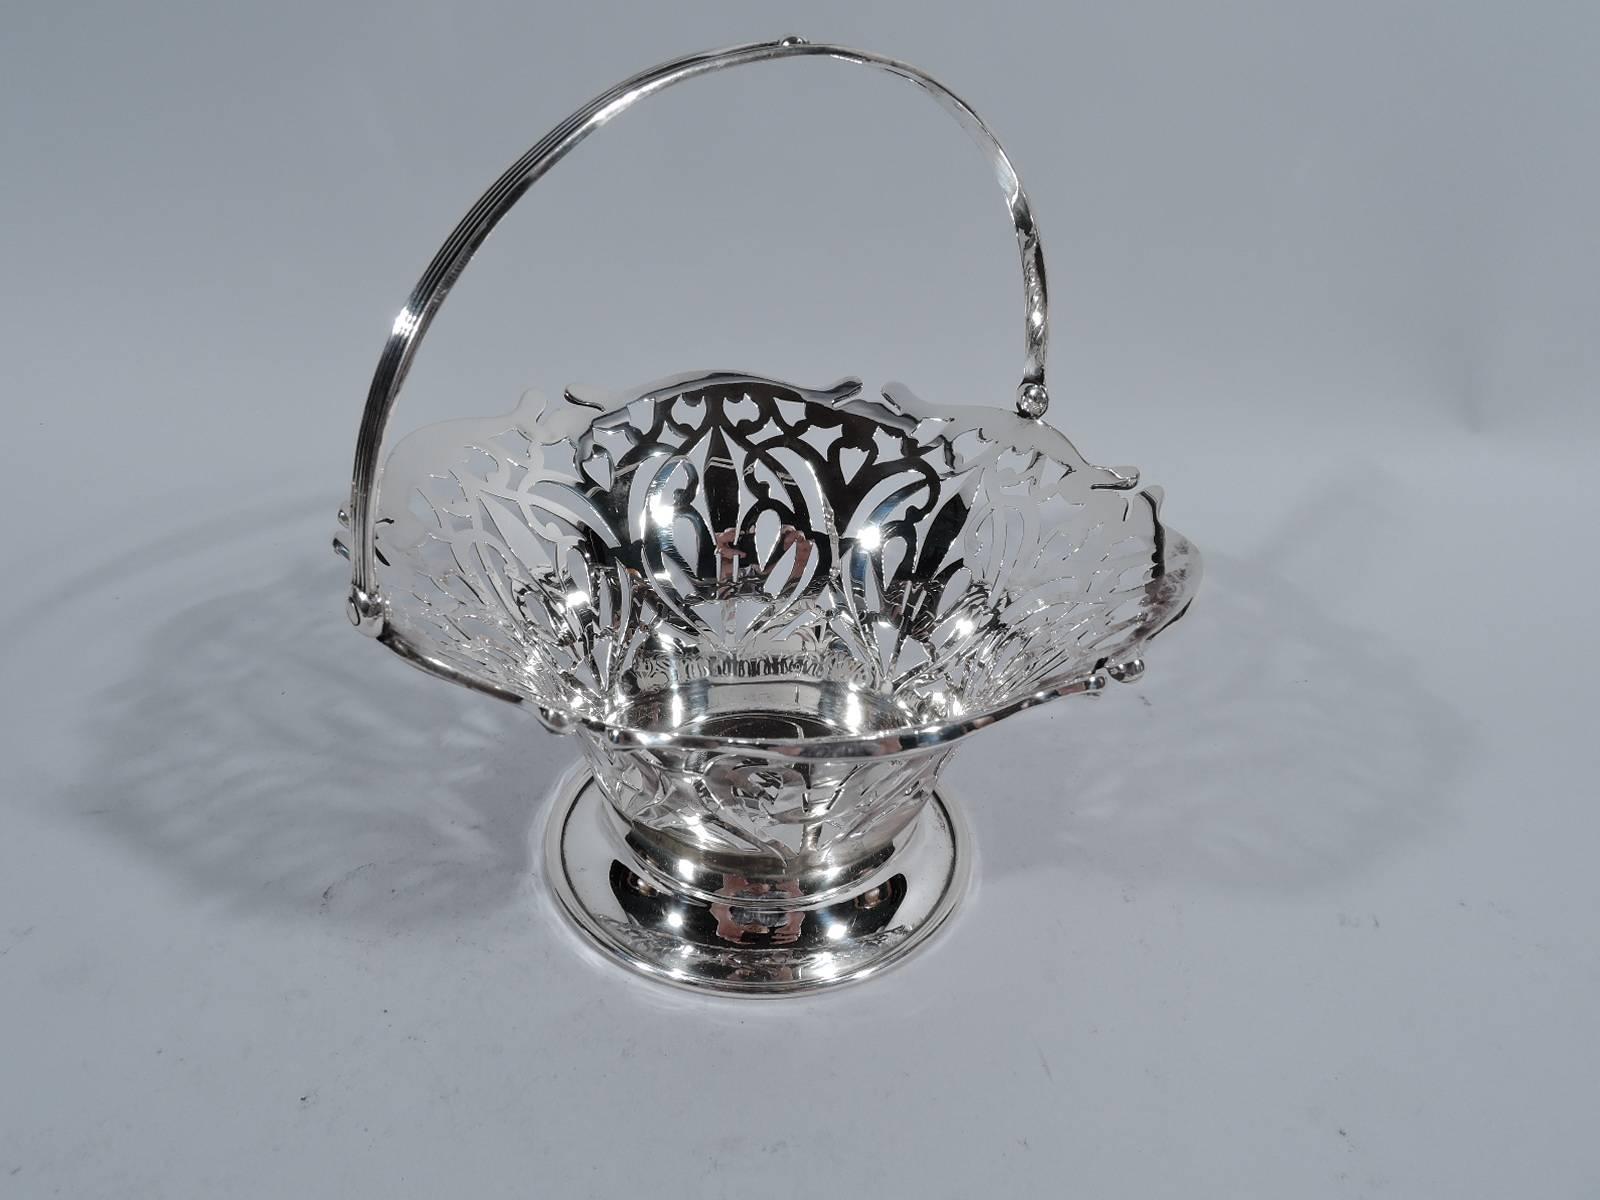 Pretty Edwardian sterling silver basket. Made by Frank W. Smith in Gardner, Mass., circa 1910. Circular solid well and flared and tapering sides with pierced abstract scrollwork. Reeded swing handle. Solid spread foot. Very sweet – a perfect hostess